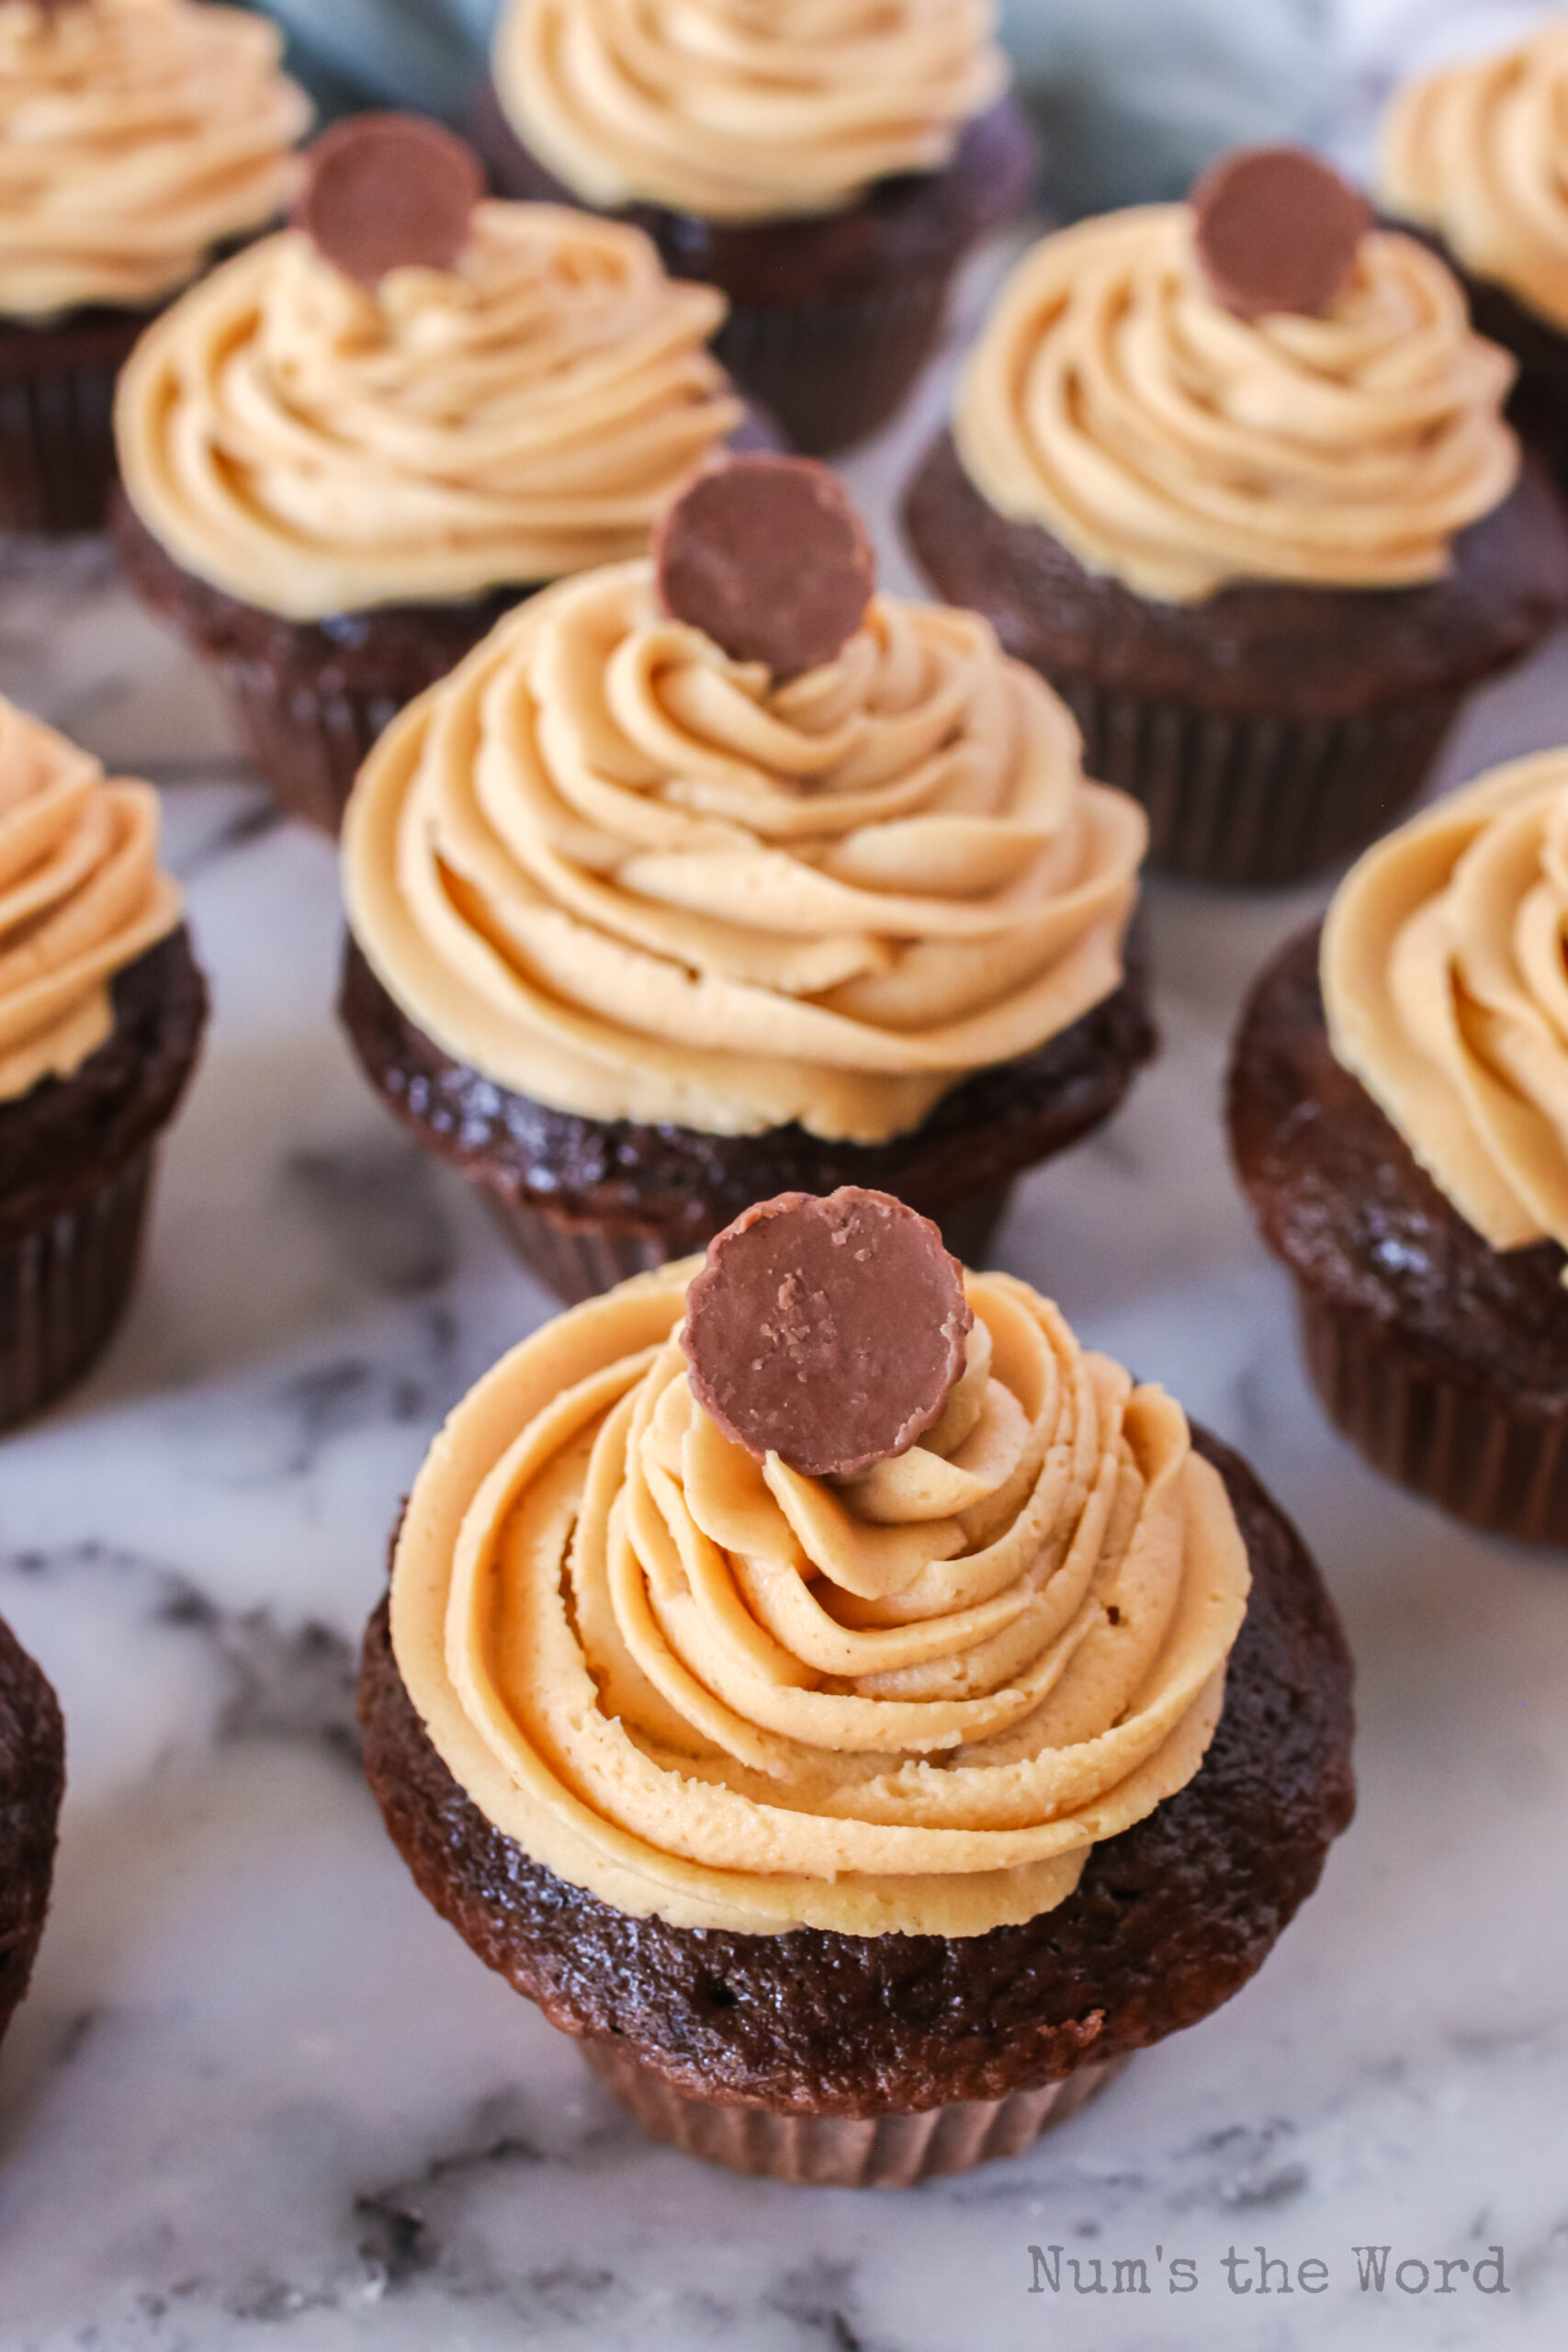 A mini peanut butter cup placed on top of each frosted cupcake